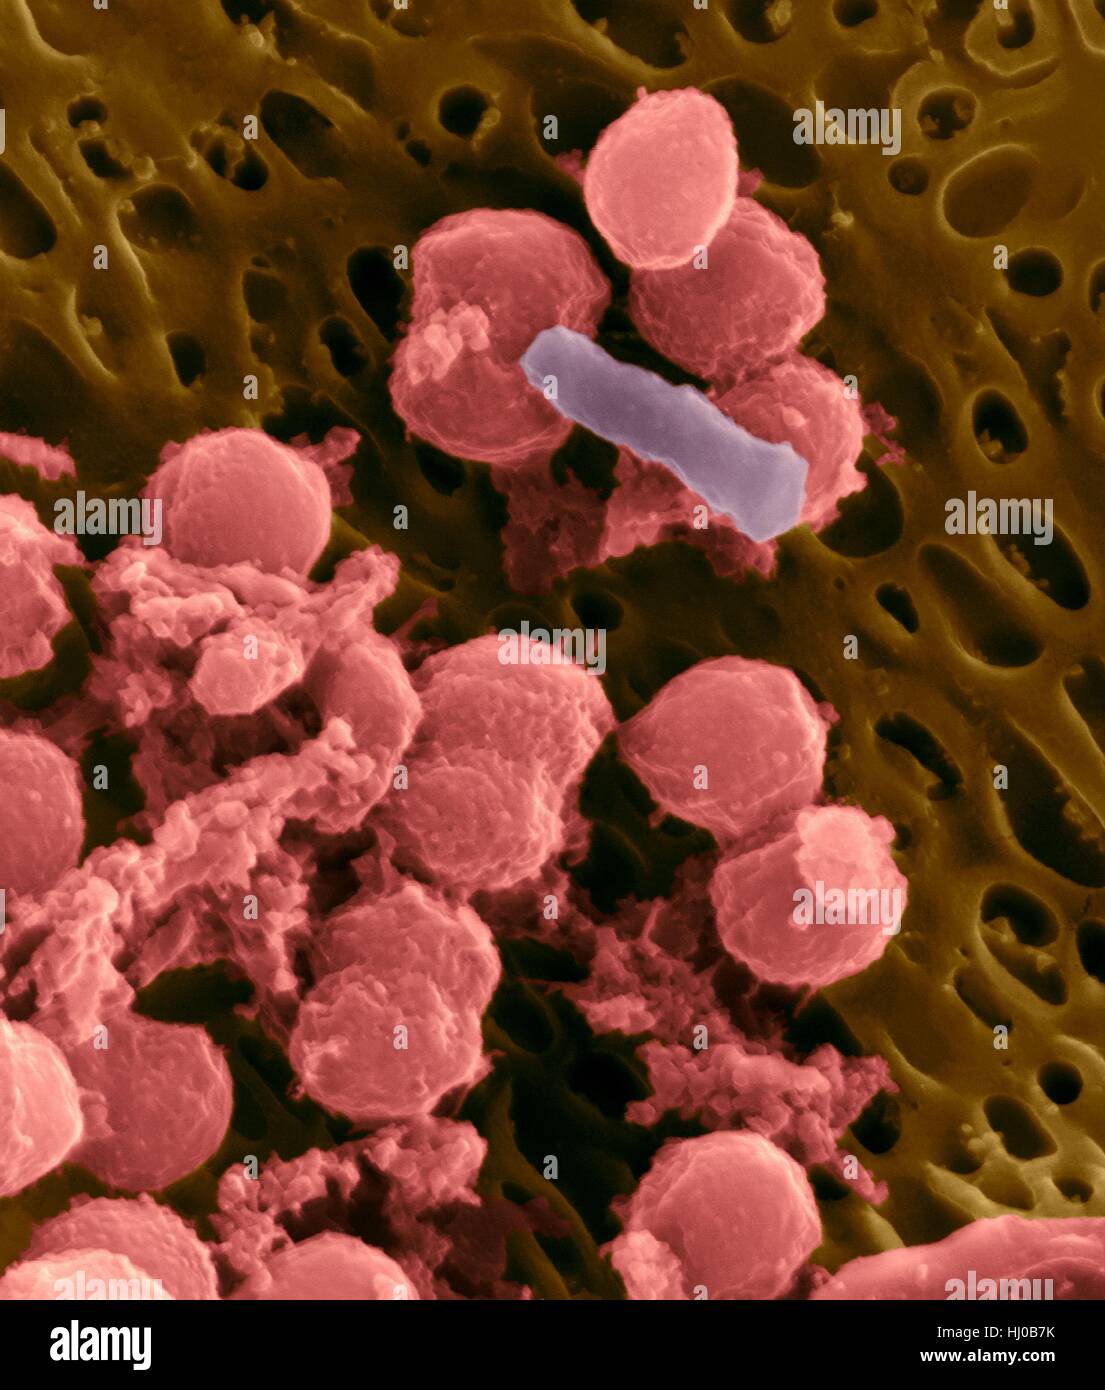 Bacteria on an epithelial cell from the human tongue filiform papilla, coloured scanning electron micrograph (SEM). Coccoid bacteria (likely Streptococcus mutans due to the fibrous glucan matrix that surrounds the cells) and one rod bacterium are seen on the epithelial surface. Most bacteria on the human tongue are harmless or even beneficial. However some bacteria can cause throat infections and form plaque deposits on teeth. Plaque will also lead to tooth decay and periodontal disease. Magnification: x5, 000 when shortest axis printed at 25 millimetres. Stock Photo